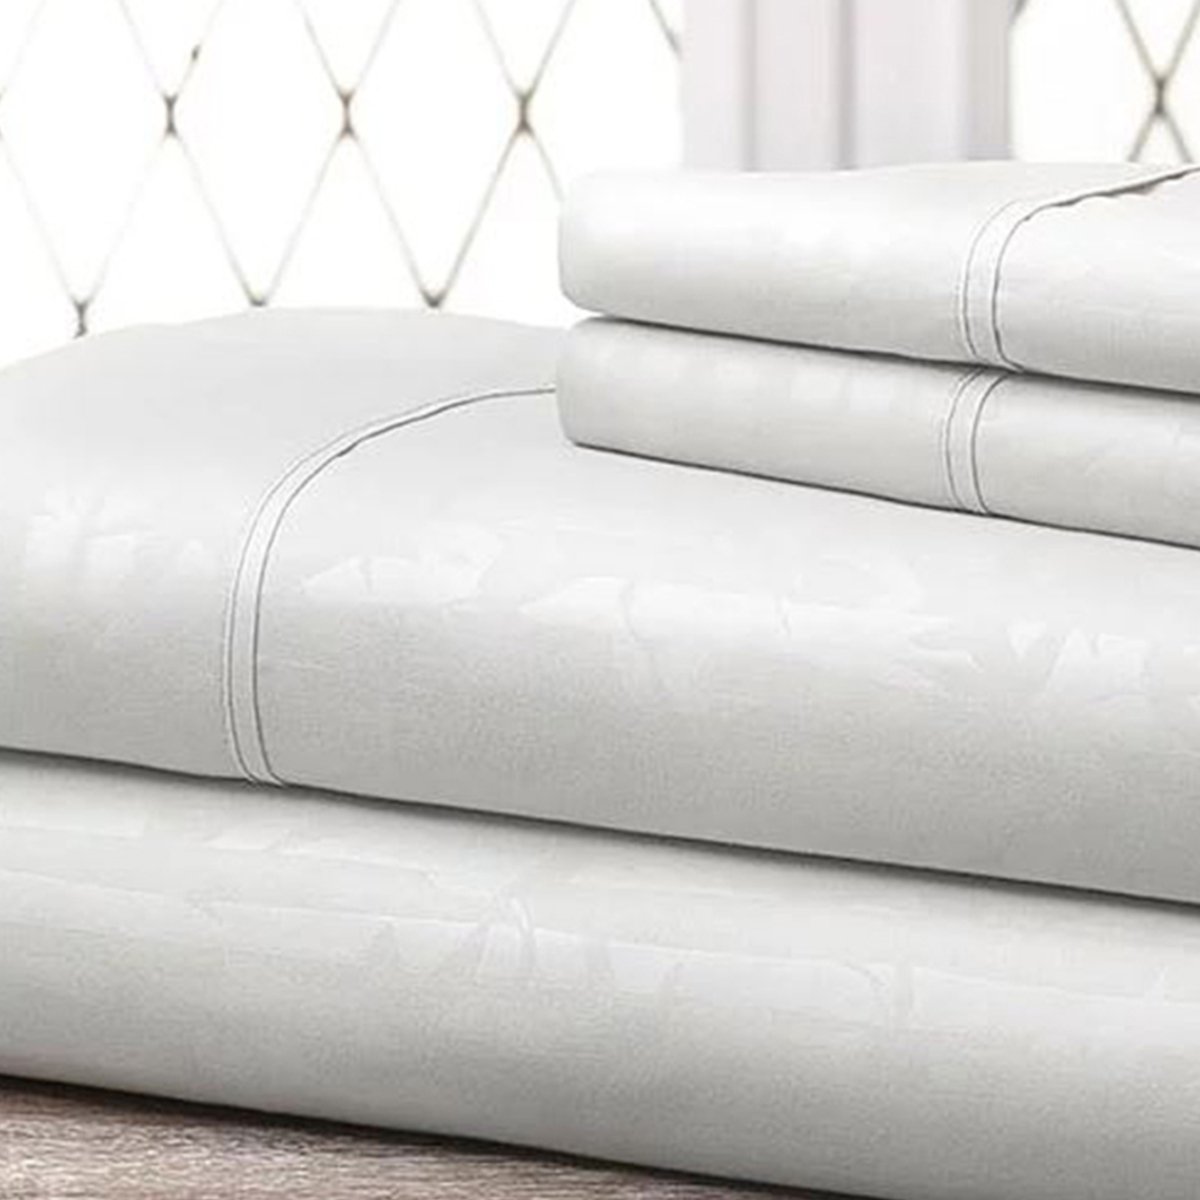 Hny-4pc-eb-whi-k Super-soft 1600 Series Bamboo Embossed Bed Sheet, White - King, 4 Piece